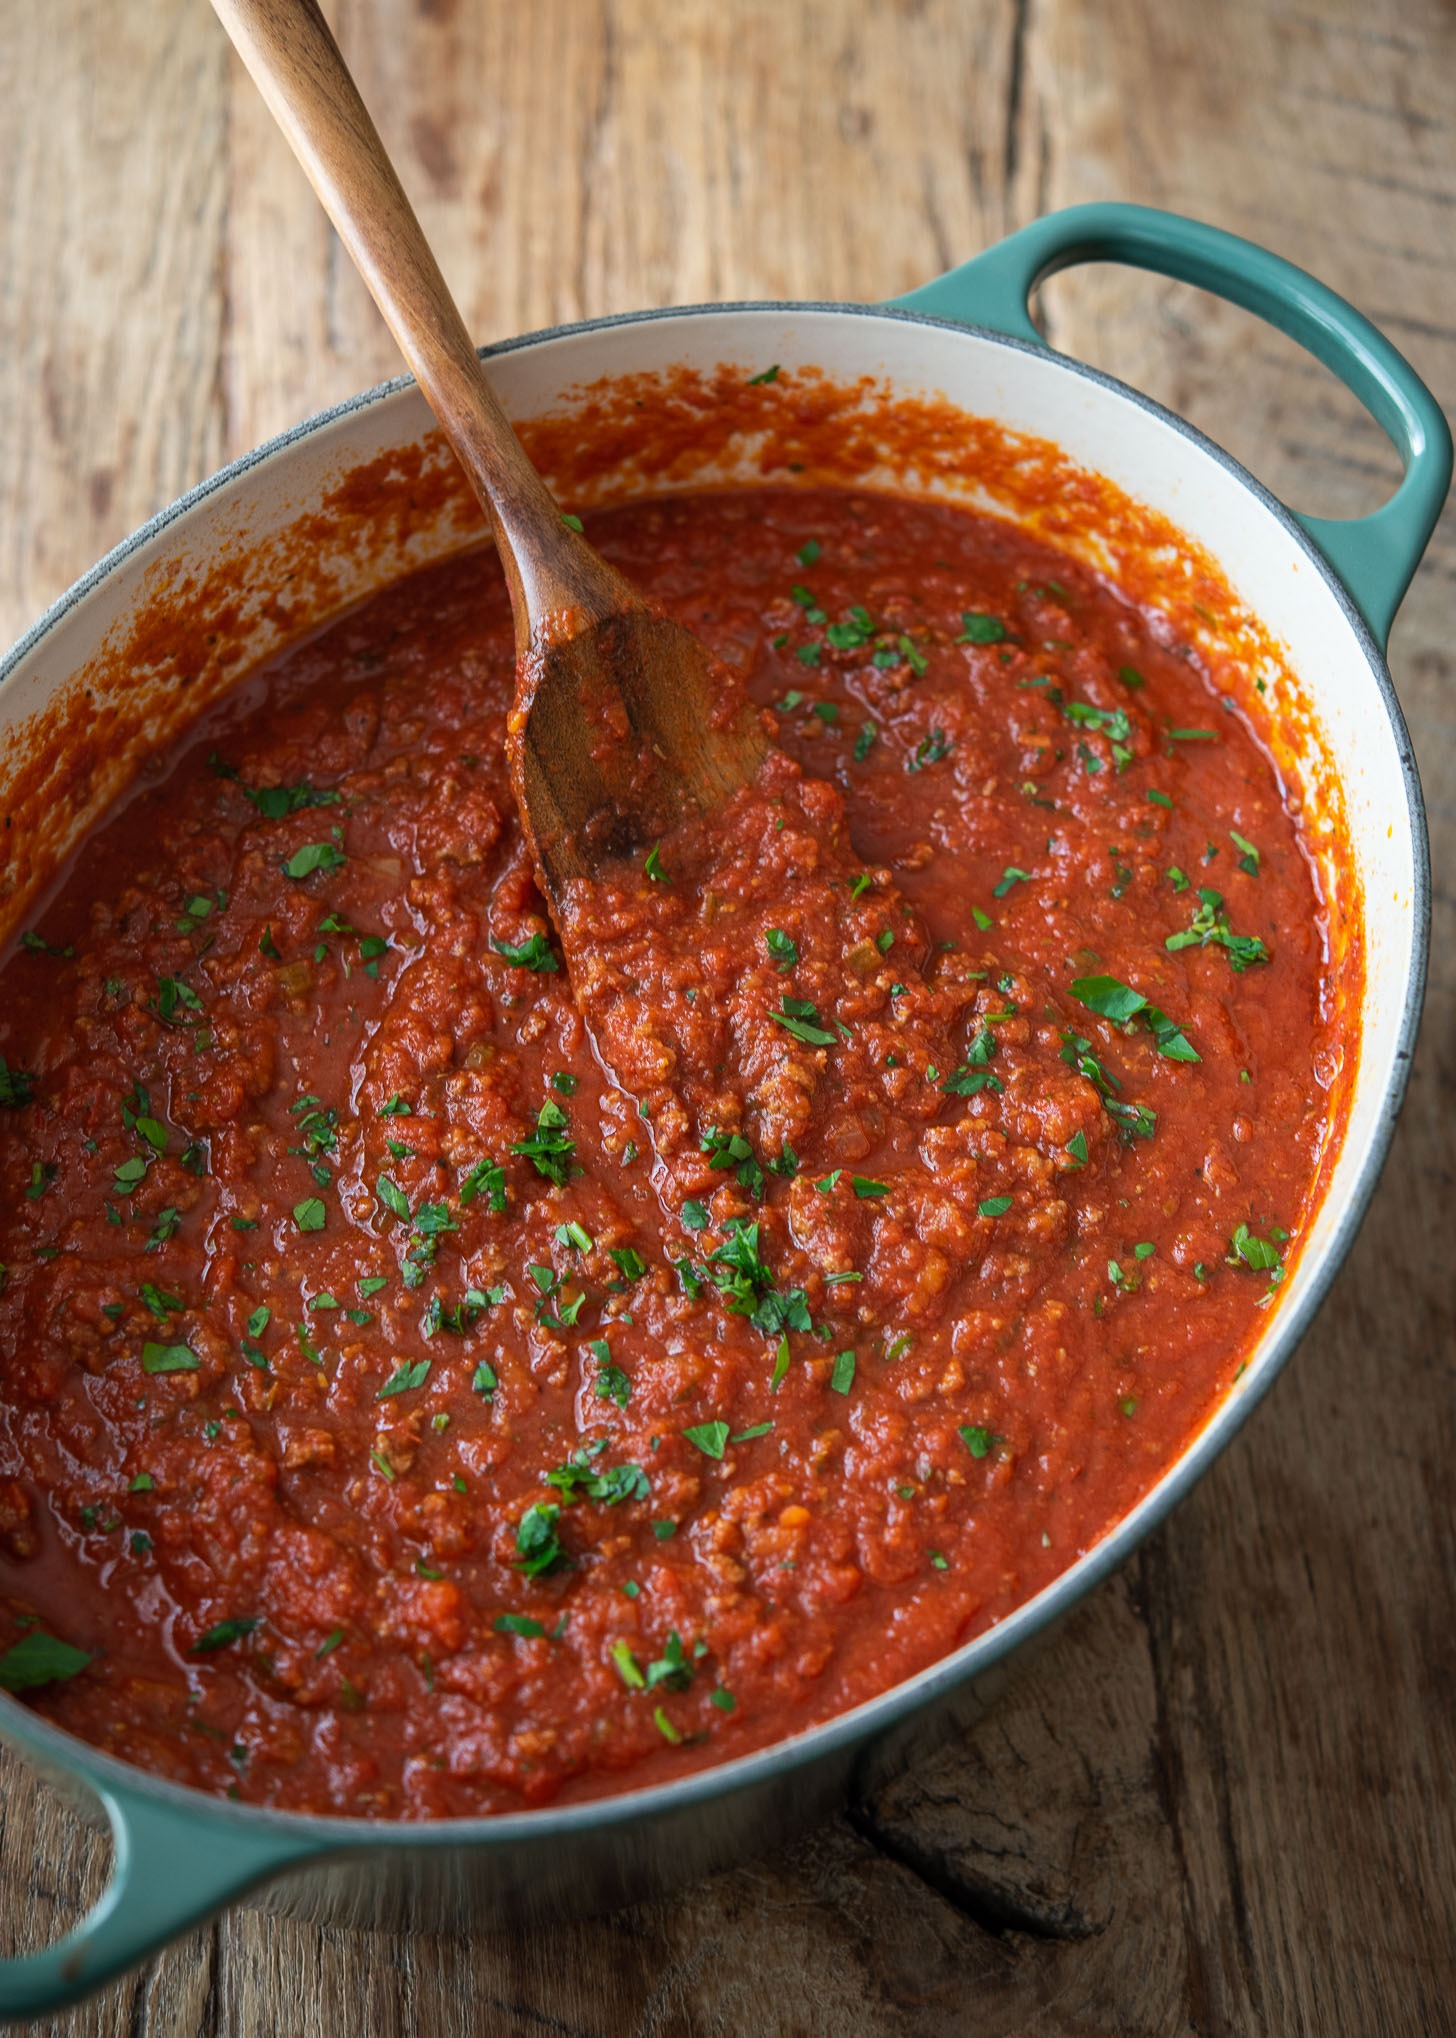 A big batch of thick homemade spaghetti sauce simmered in a large pot.